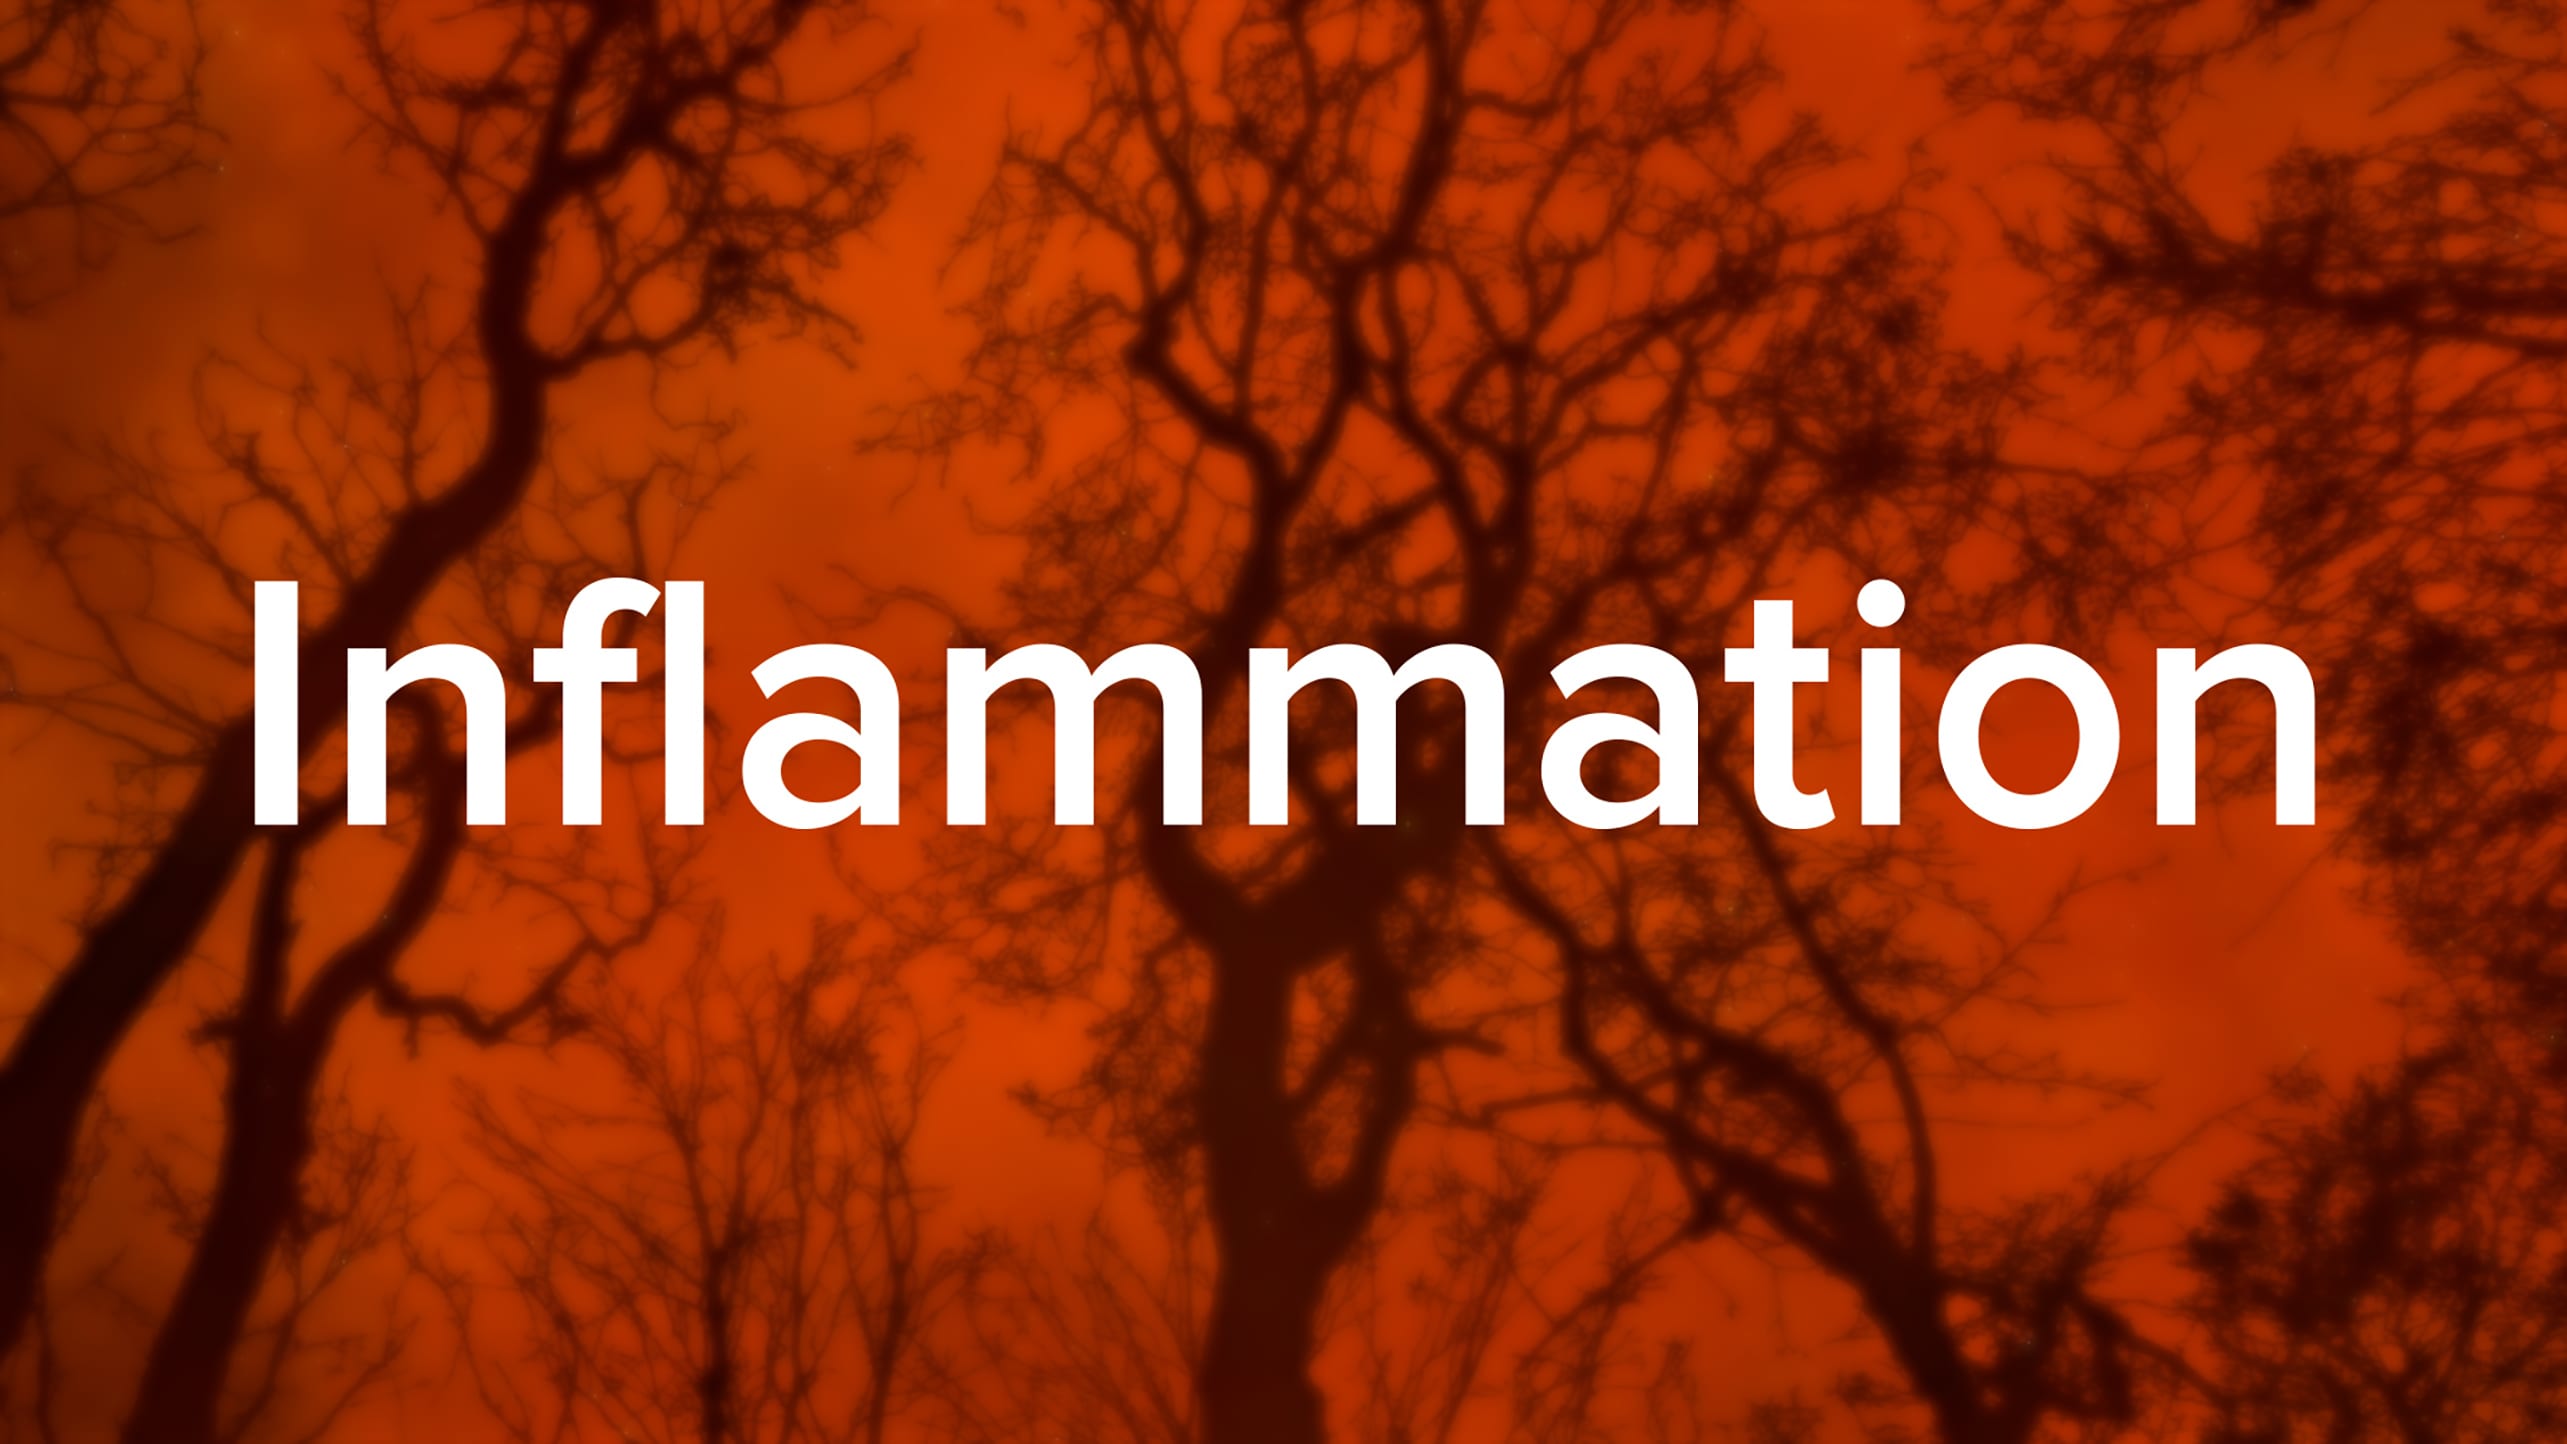 The word "inflammation" in bold white letters over a background of branching blood vessels